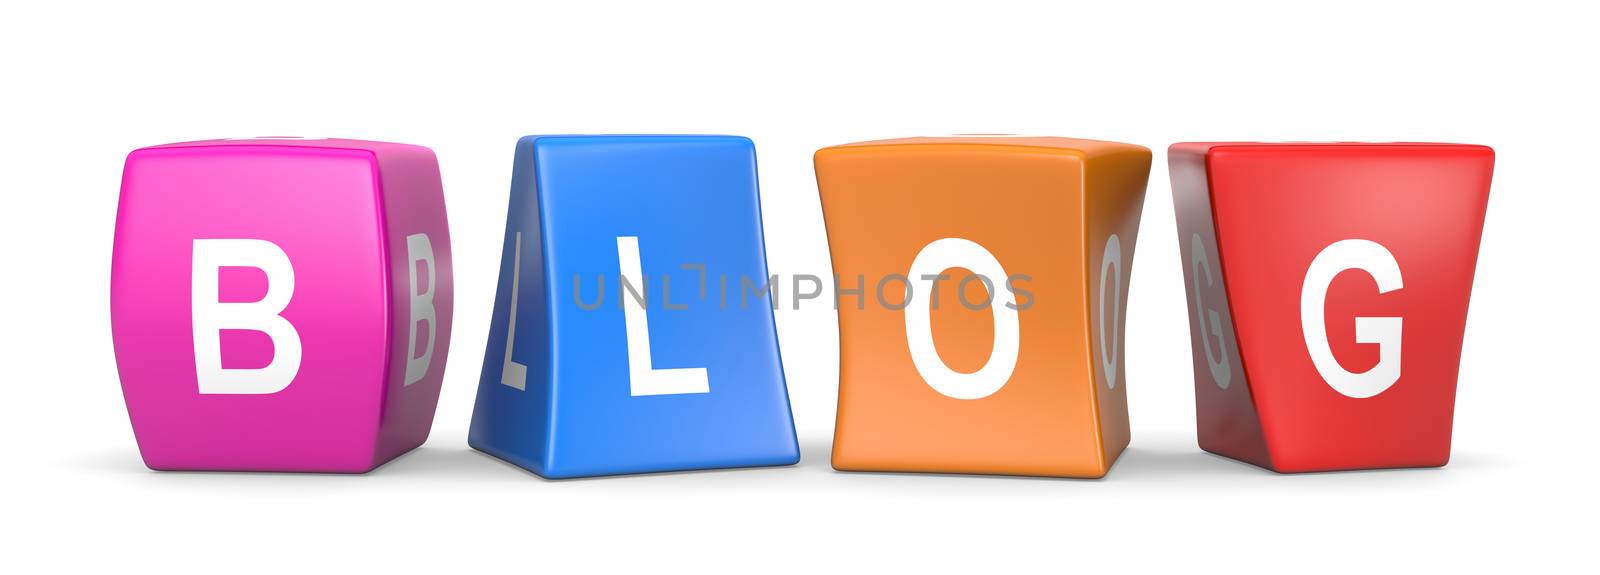 Blog Funny Cubes by make